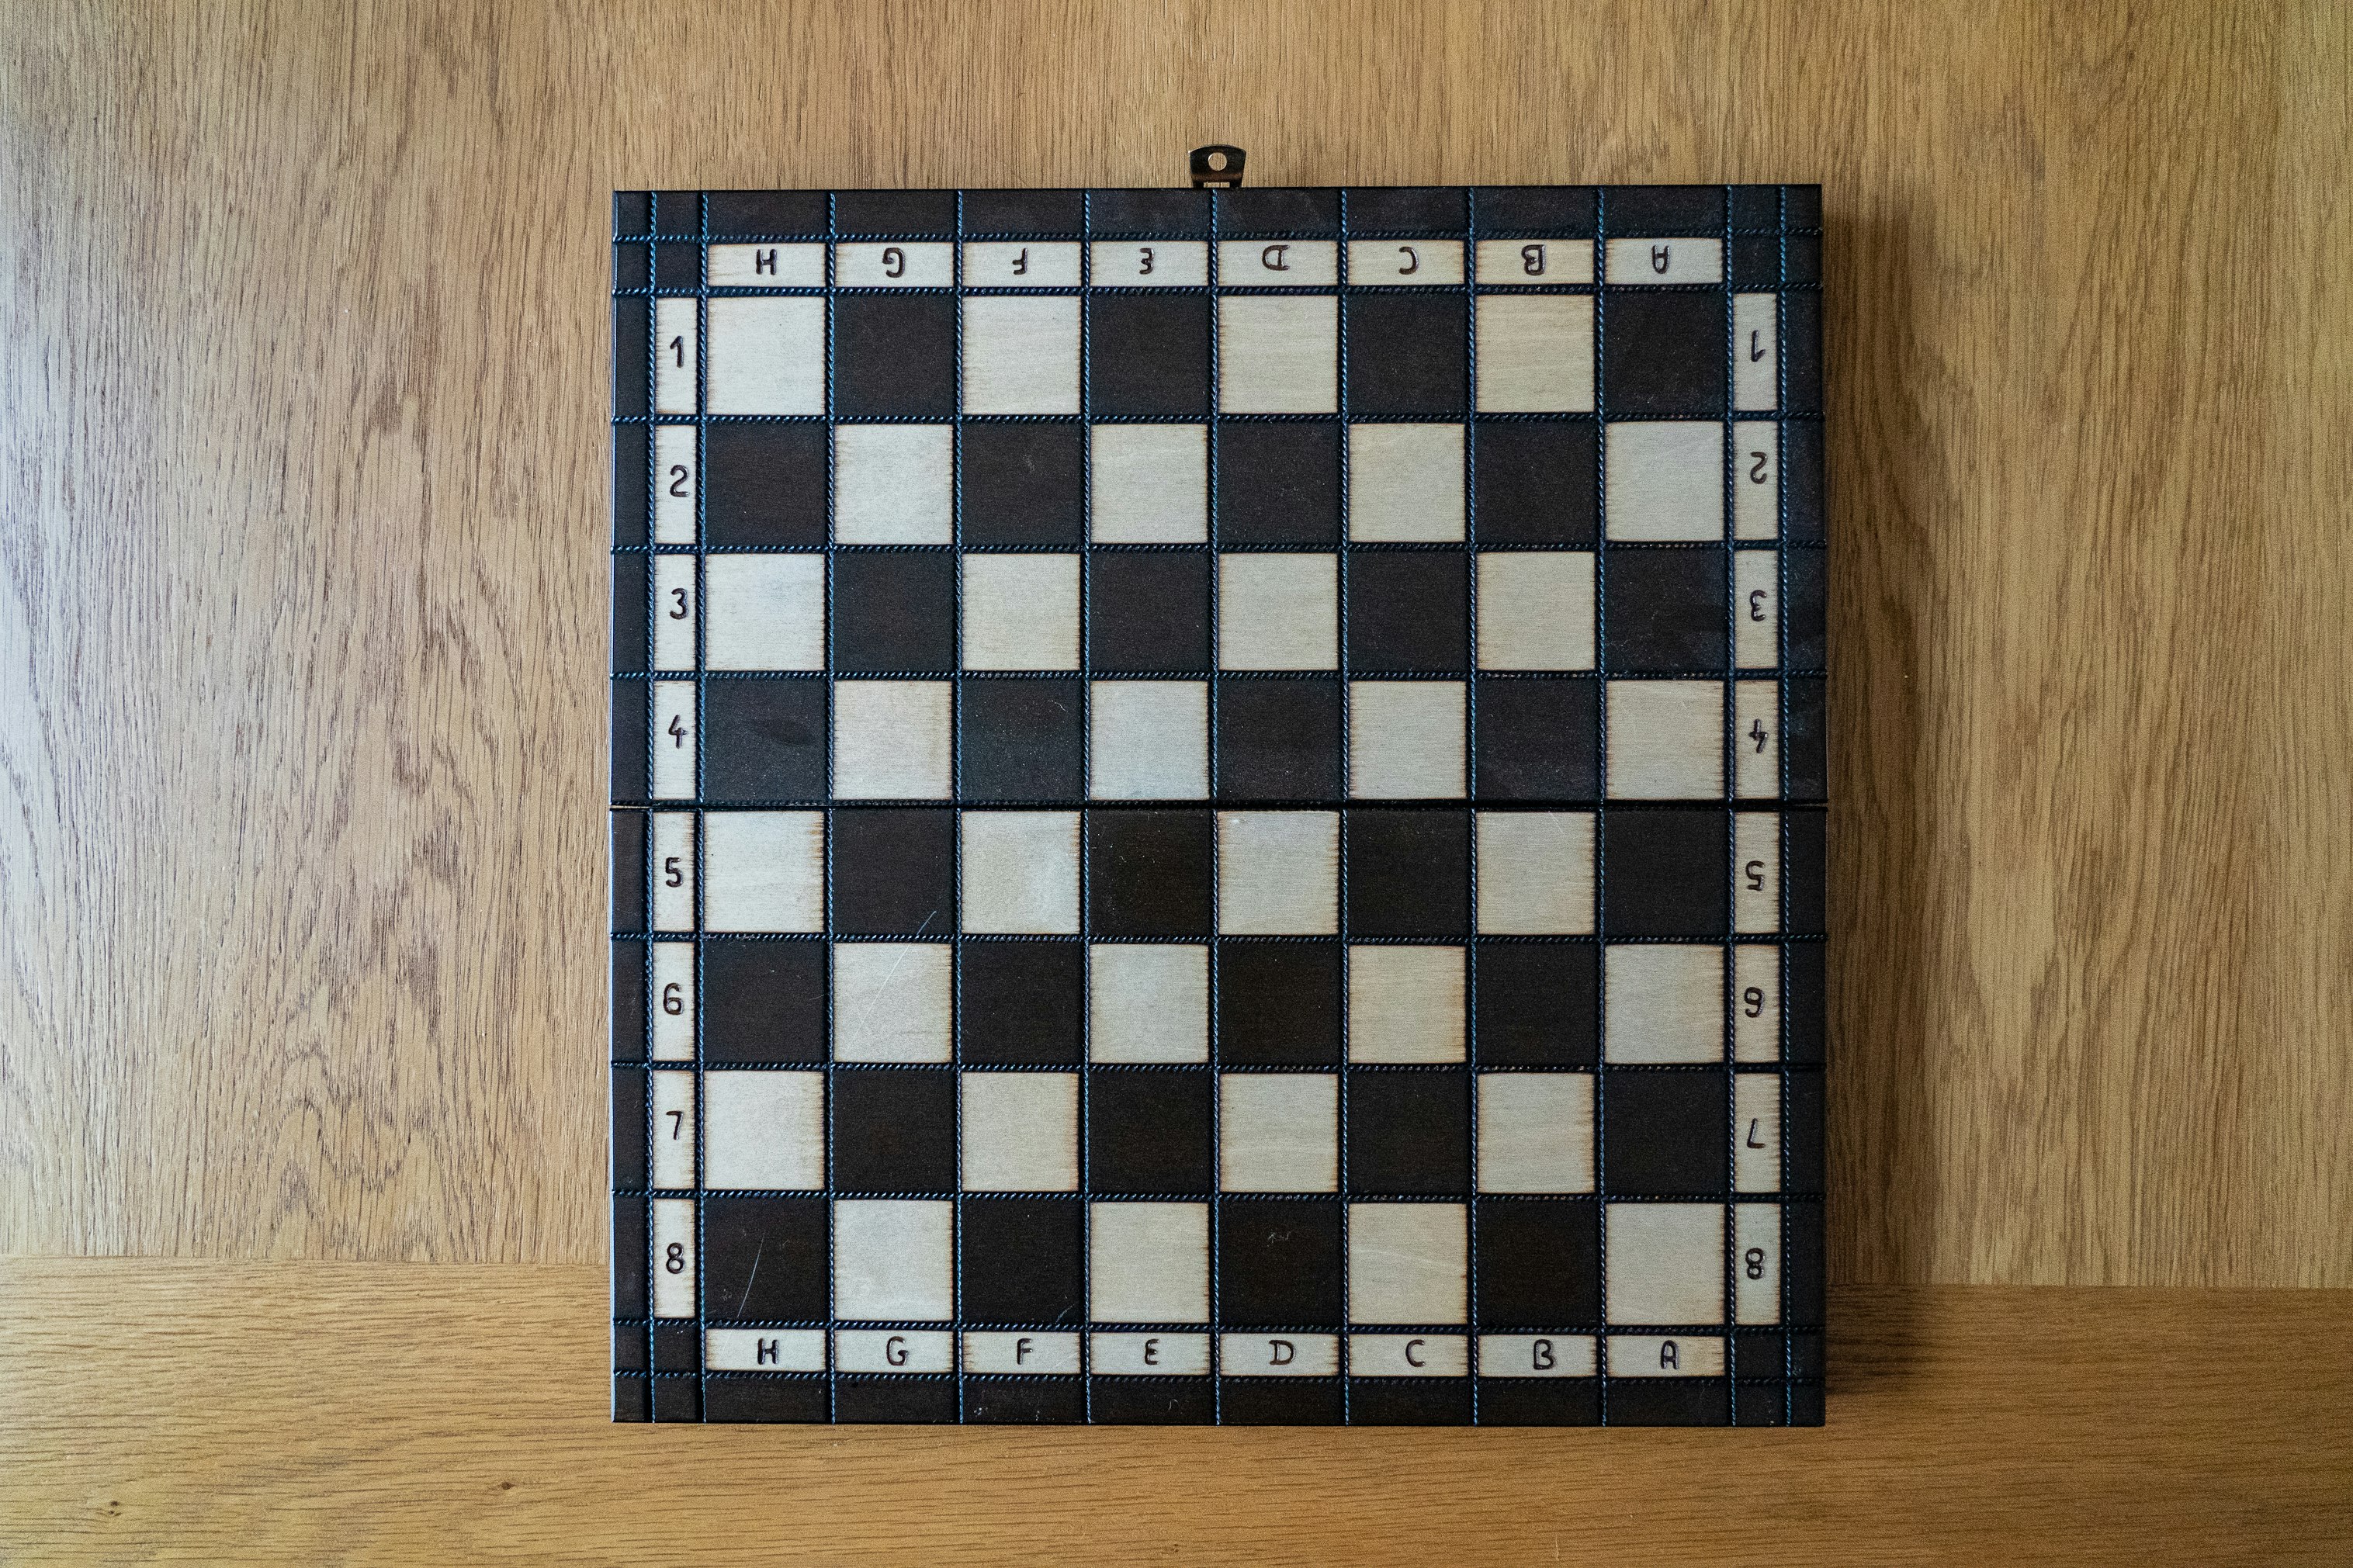 A black and white chessboard, taken from above.